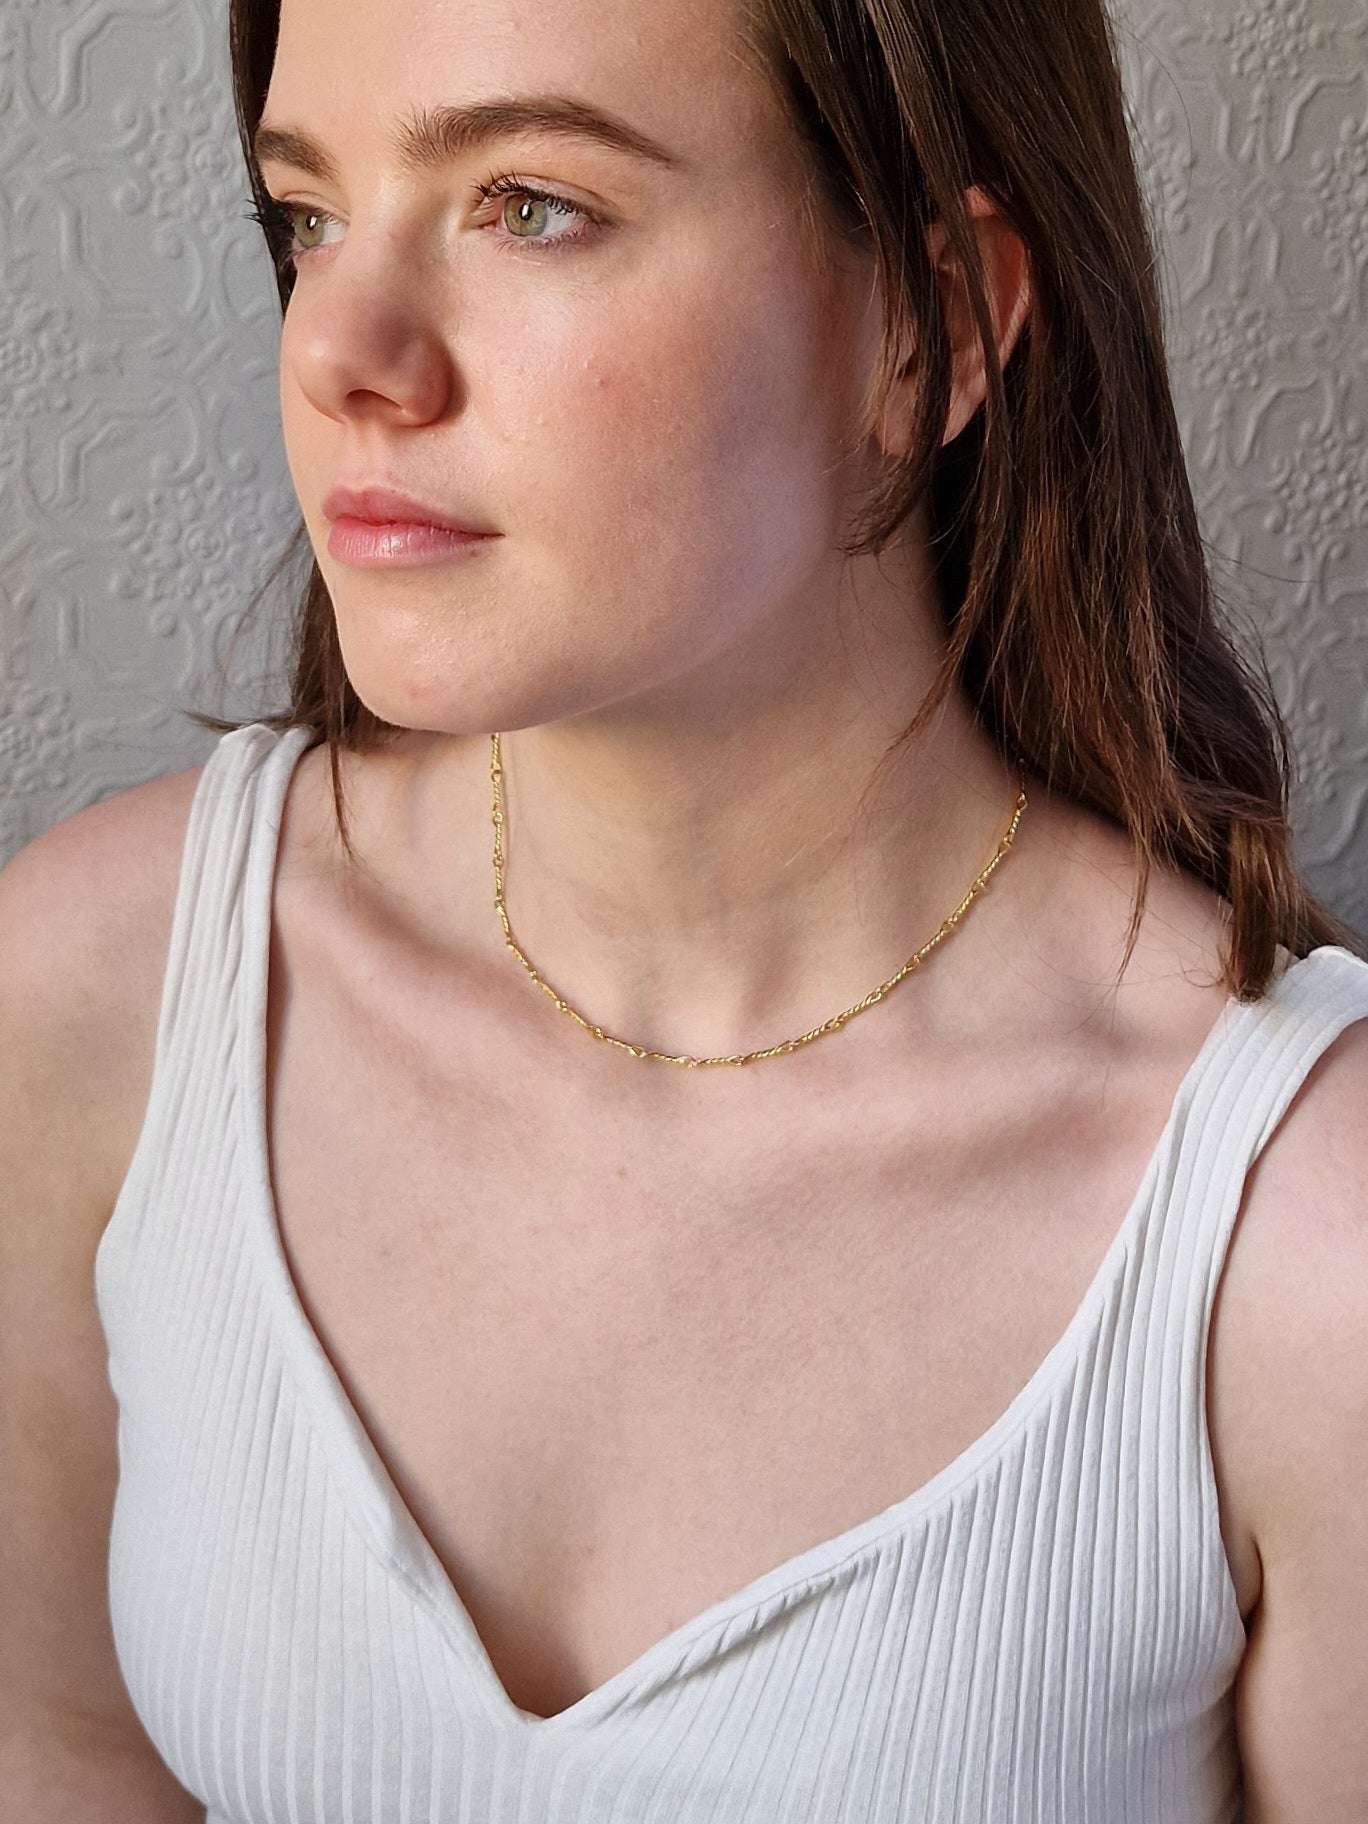 Vintage Gold Plated Twist Bar Link Chain Necklace